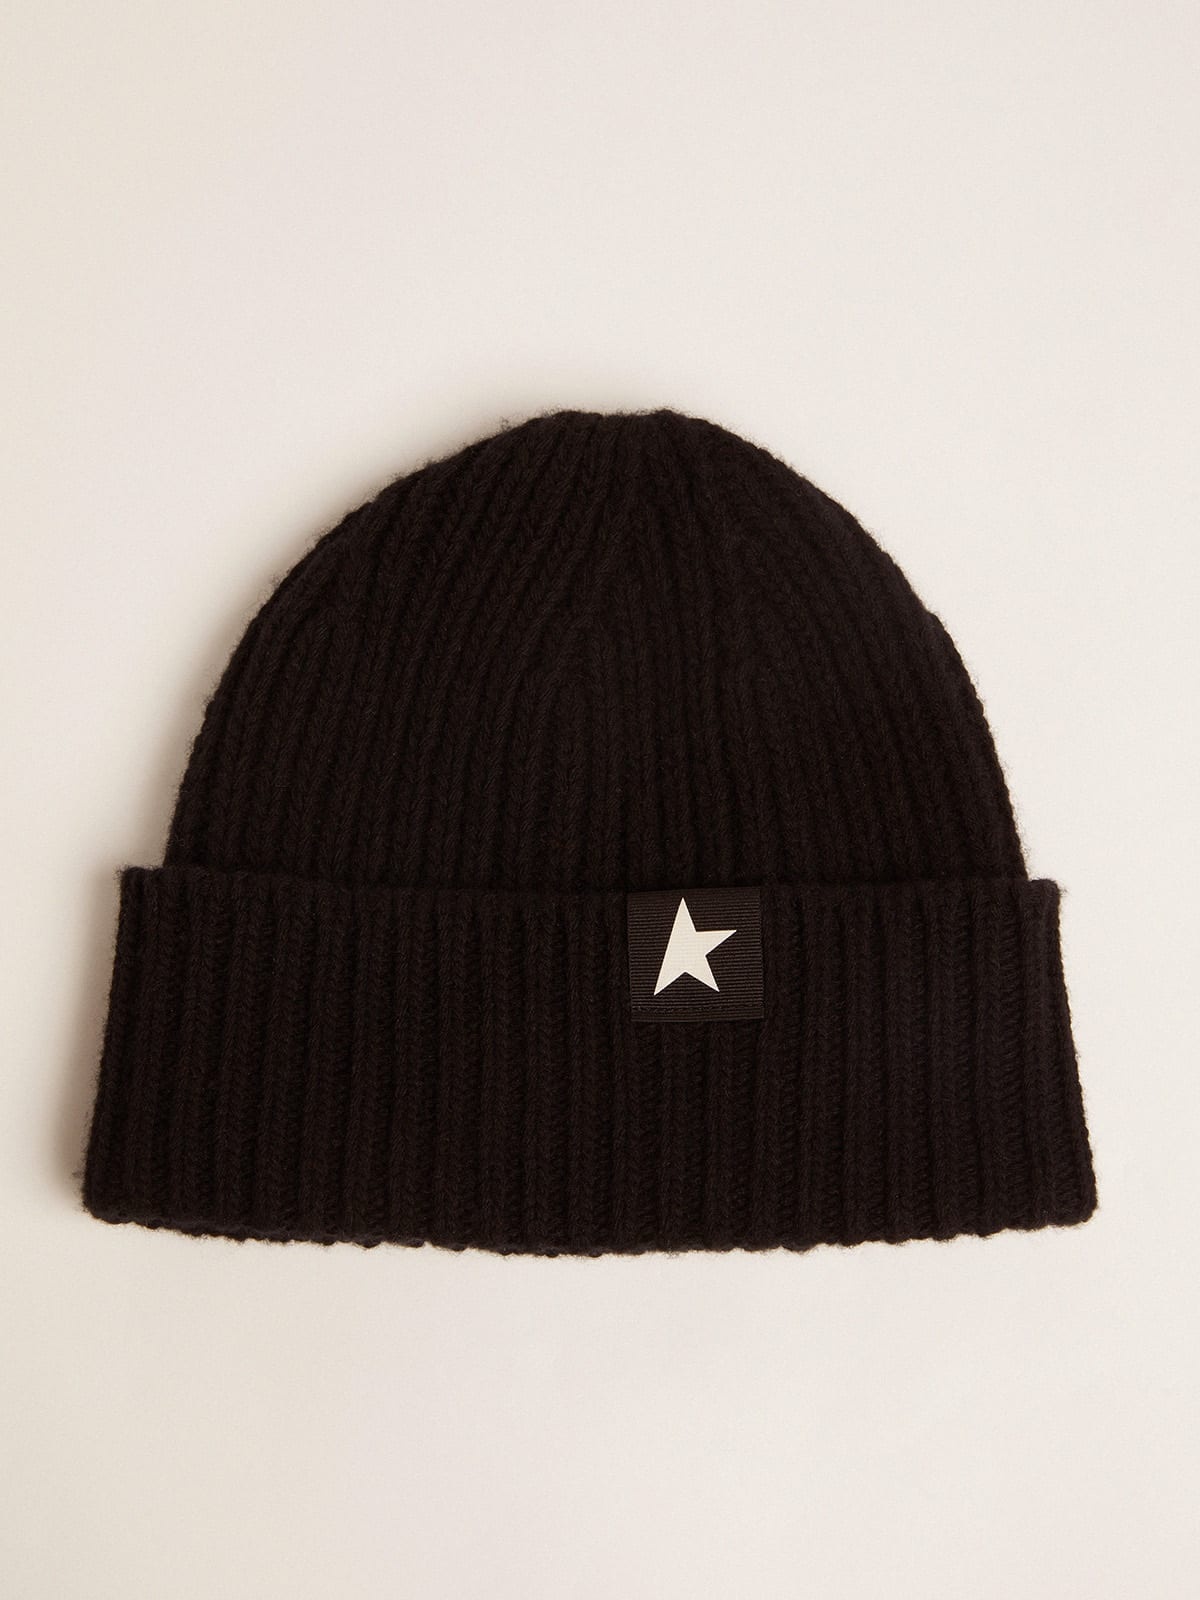 Black wool beanie with contrasting white star - 1